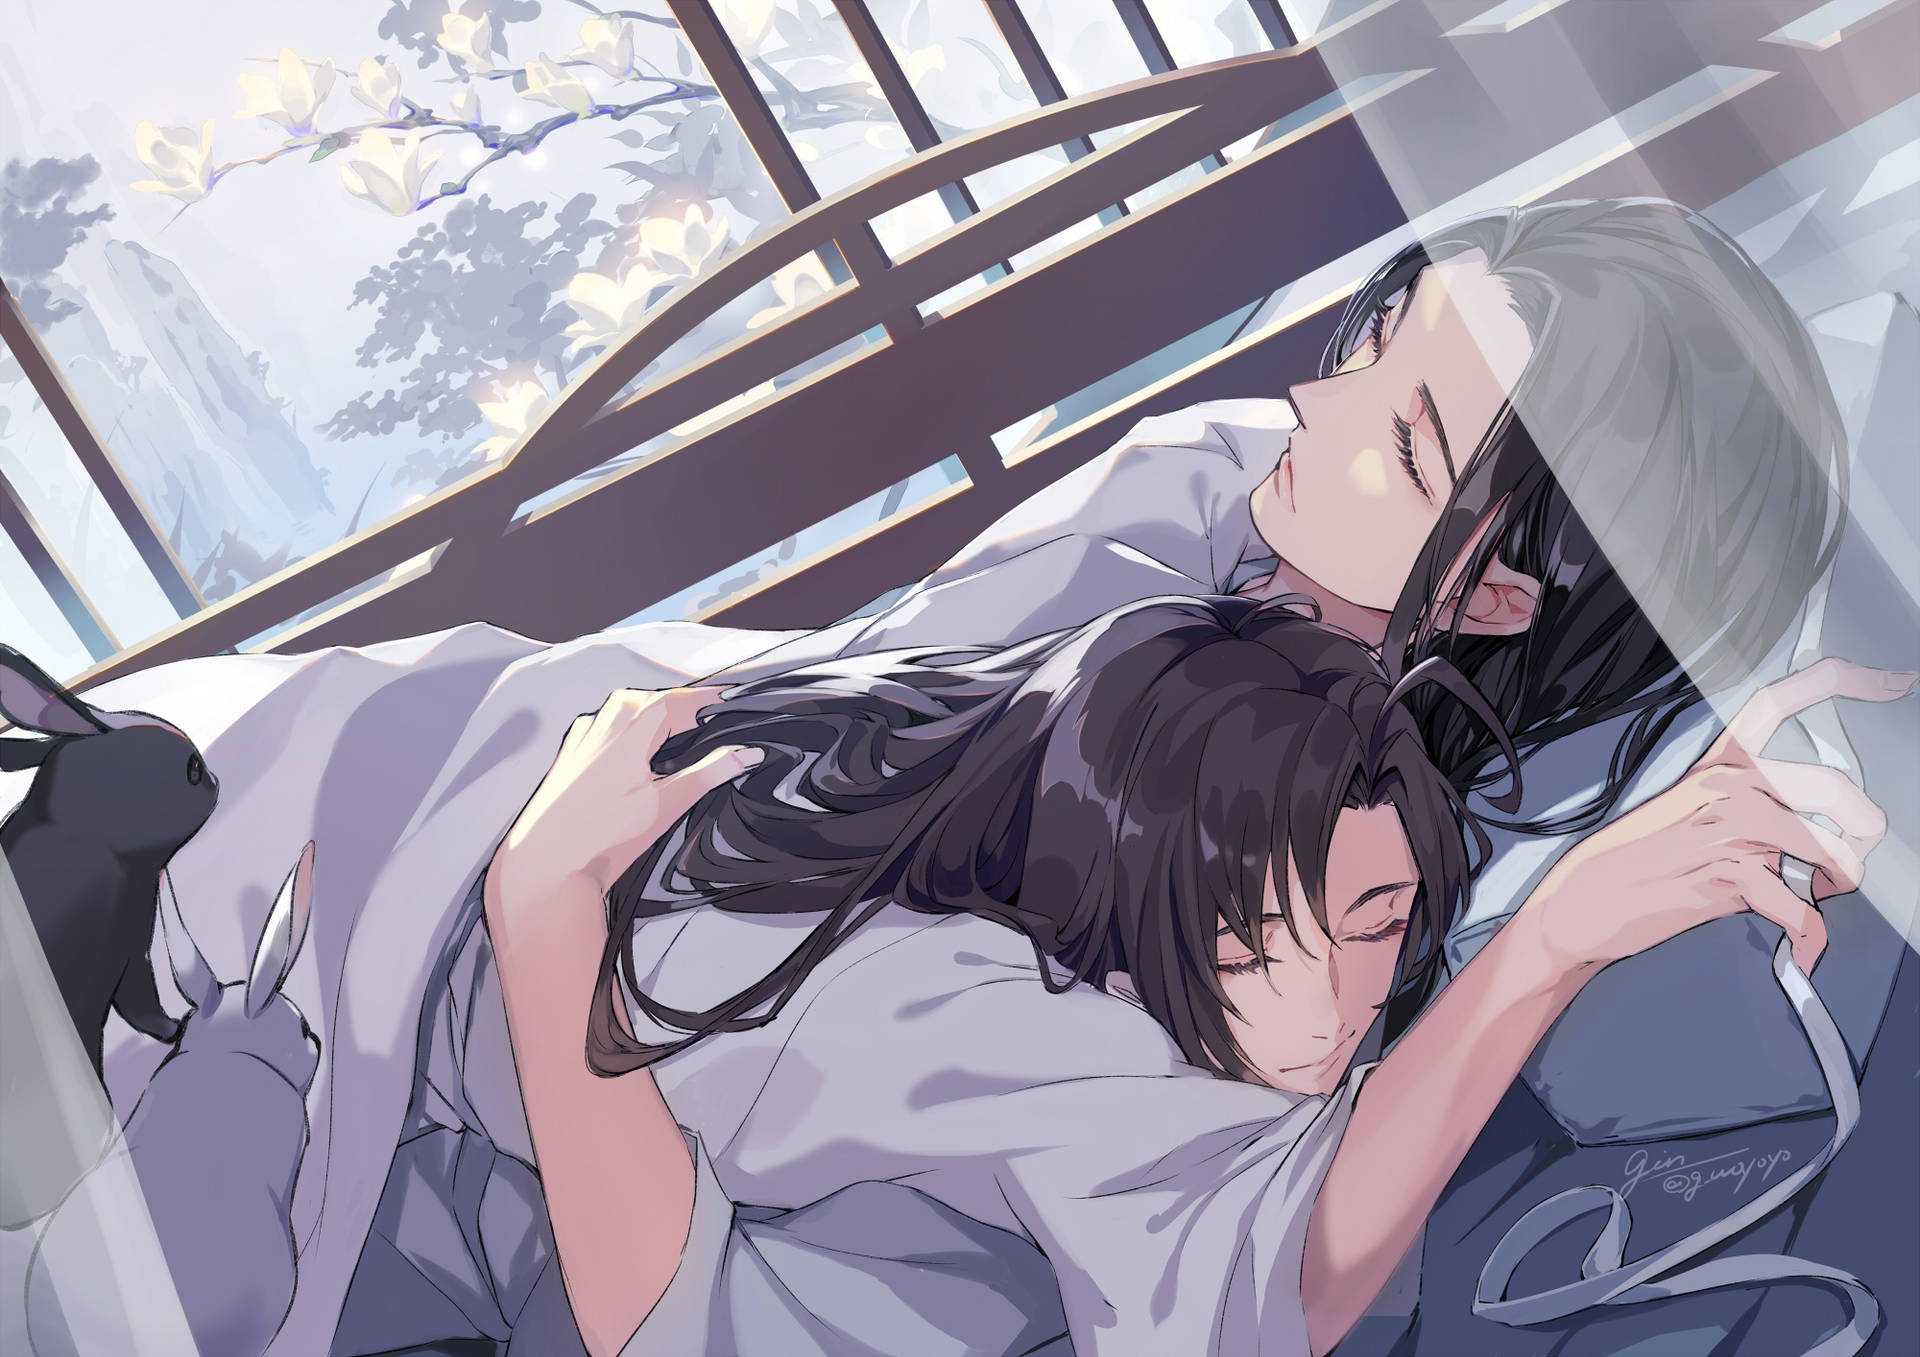 Modao Zu Shi Wangxian Sovande - This Could Be Translated As A Possible Title For A Computer Or Mobile Wallpaper Featuring The Characters From The Chinese Animated Series Mo Dao Zu Shi, Specifically Focusing On The Characters Wangxian (wei Wuxian And Lan Wangji) While They Are Sleeping. Wallpaper